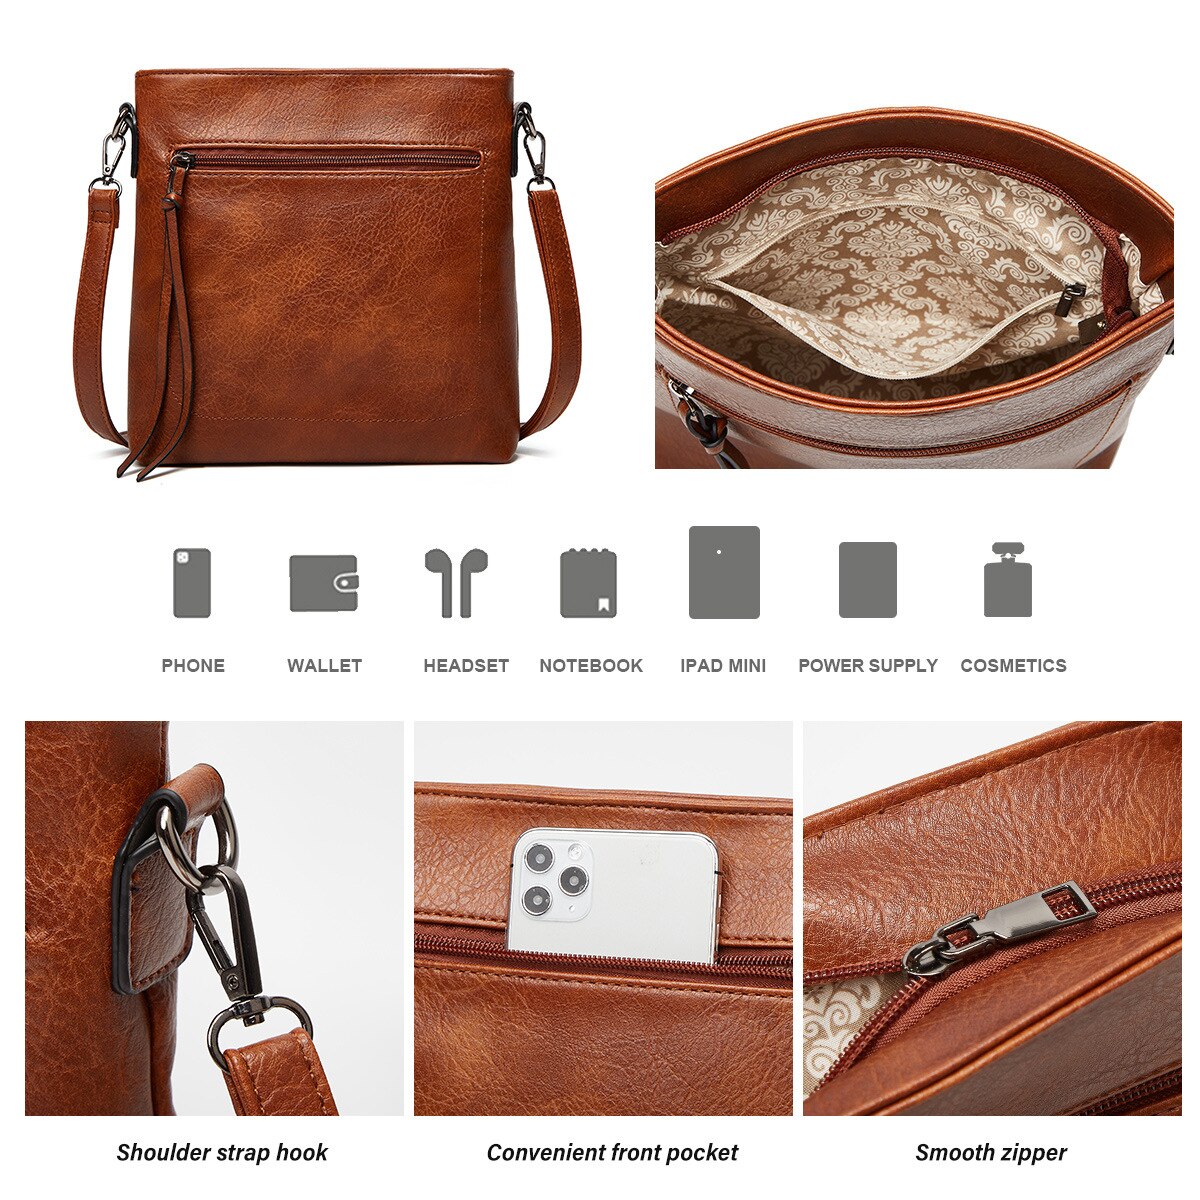 2023 Luxury Leather Handbag Sets [Special Offer for Limited time]